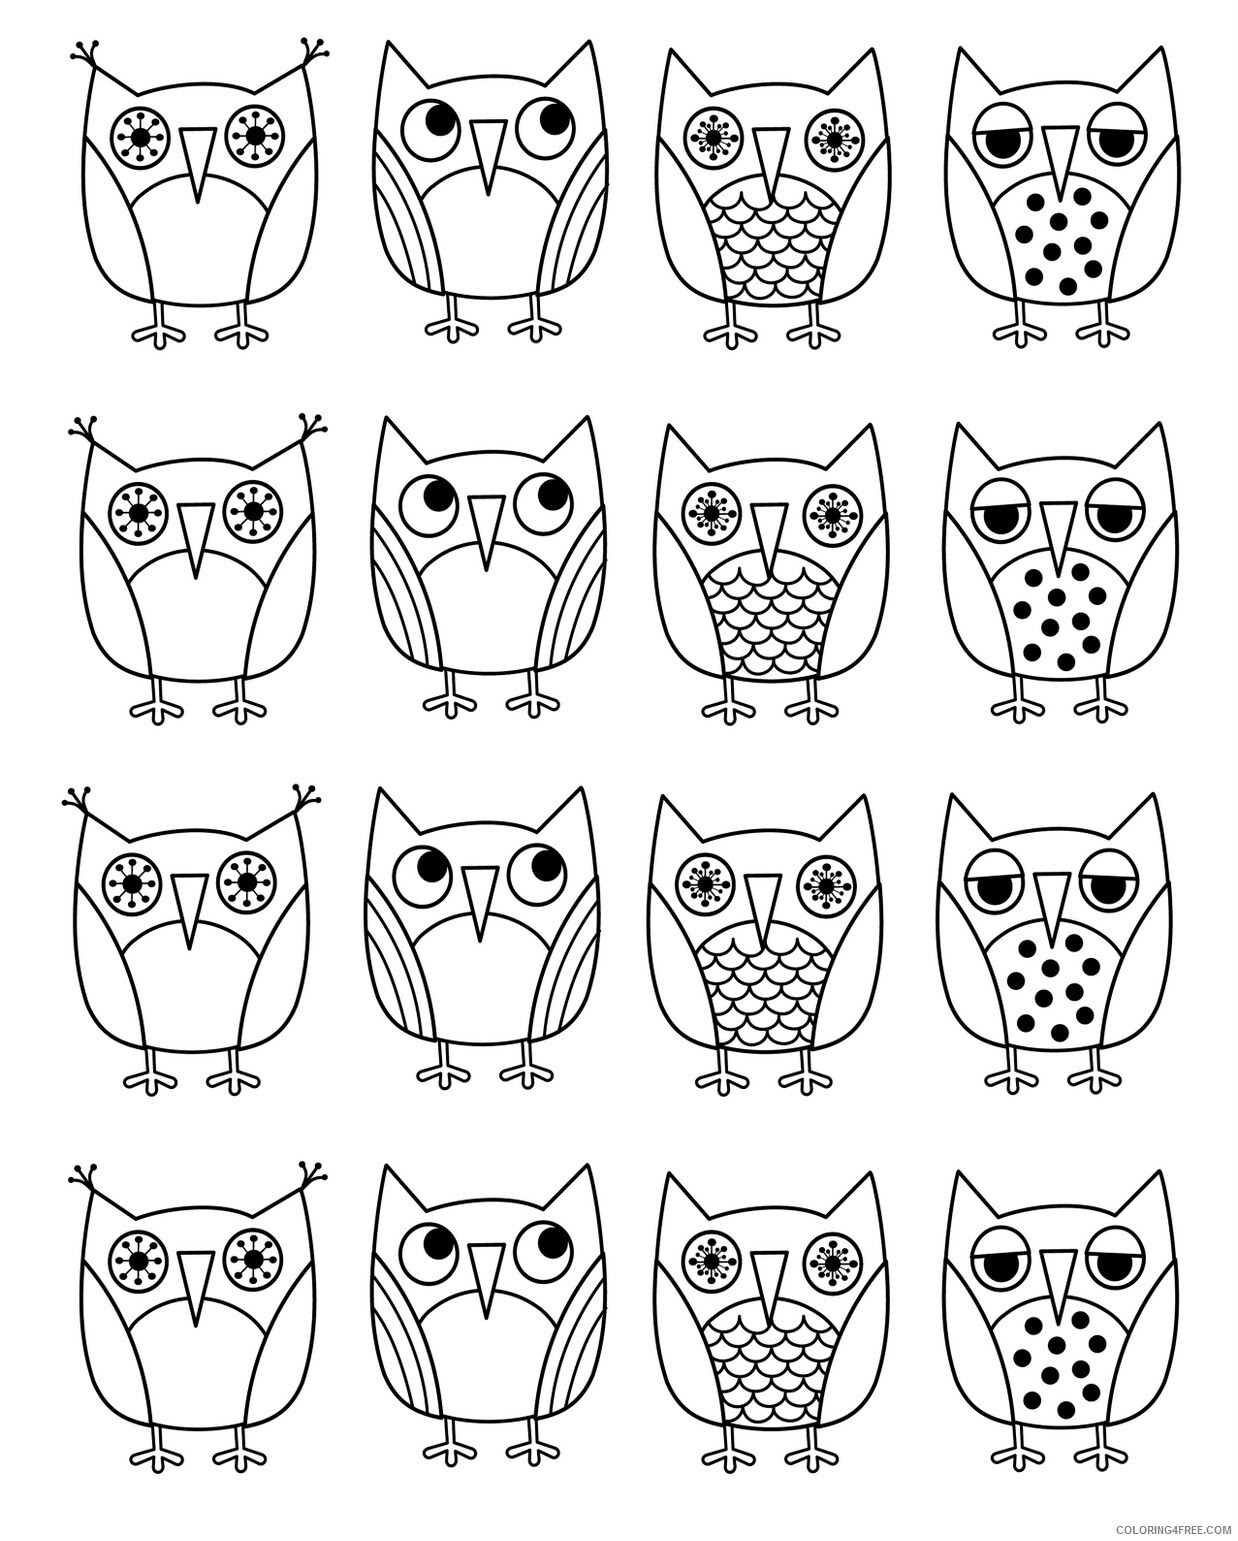 Owl Coloring Pages Animal Printable Sheets of Owls For Kids 2021 3616 Coloring4free